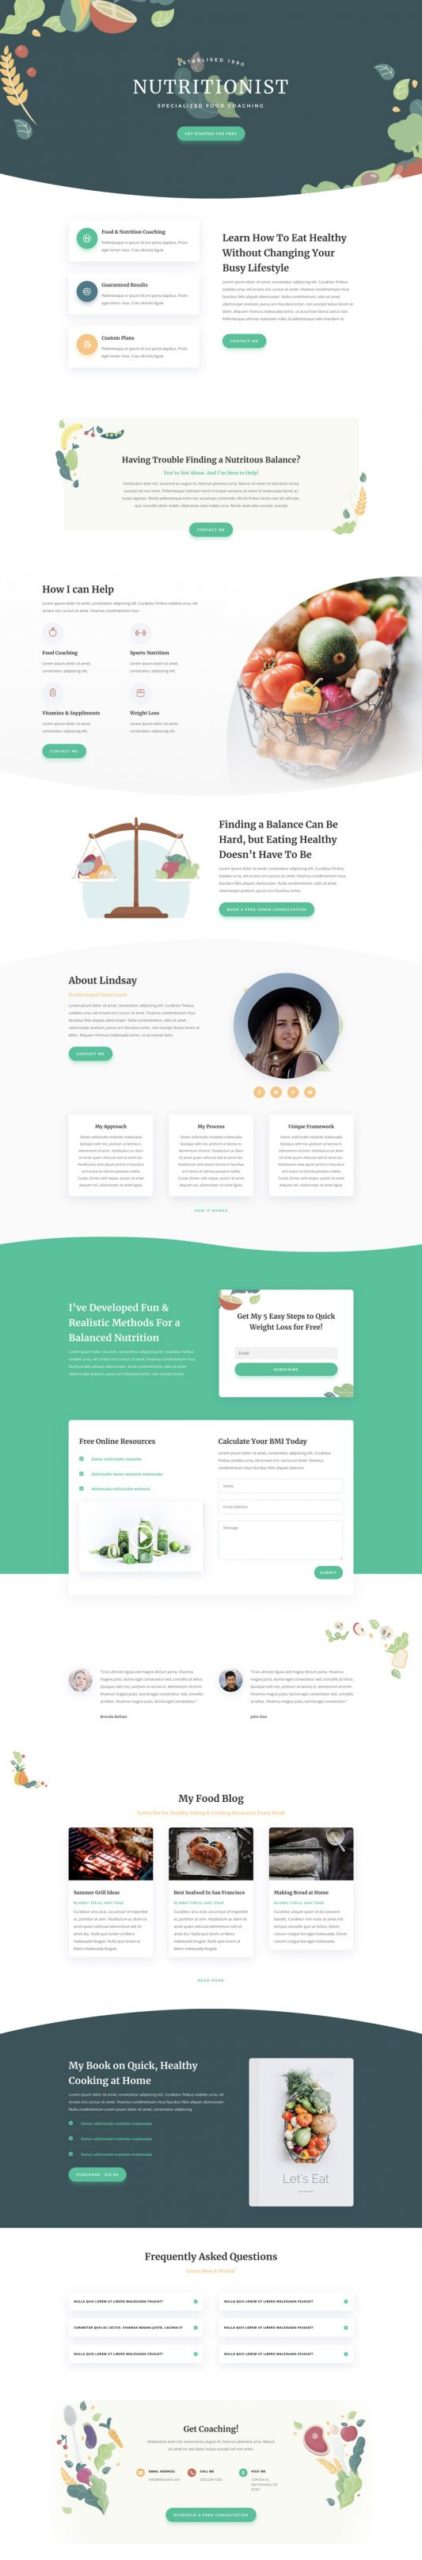 Nutritionist Landing Page